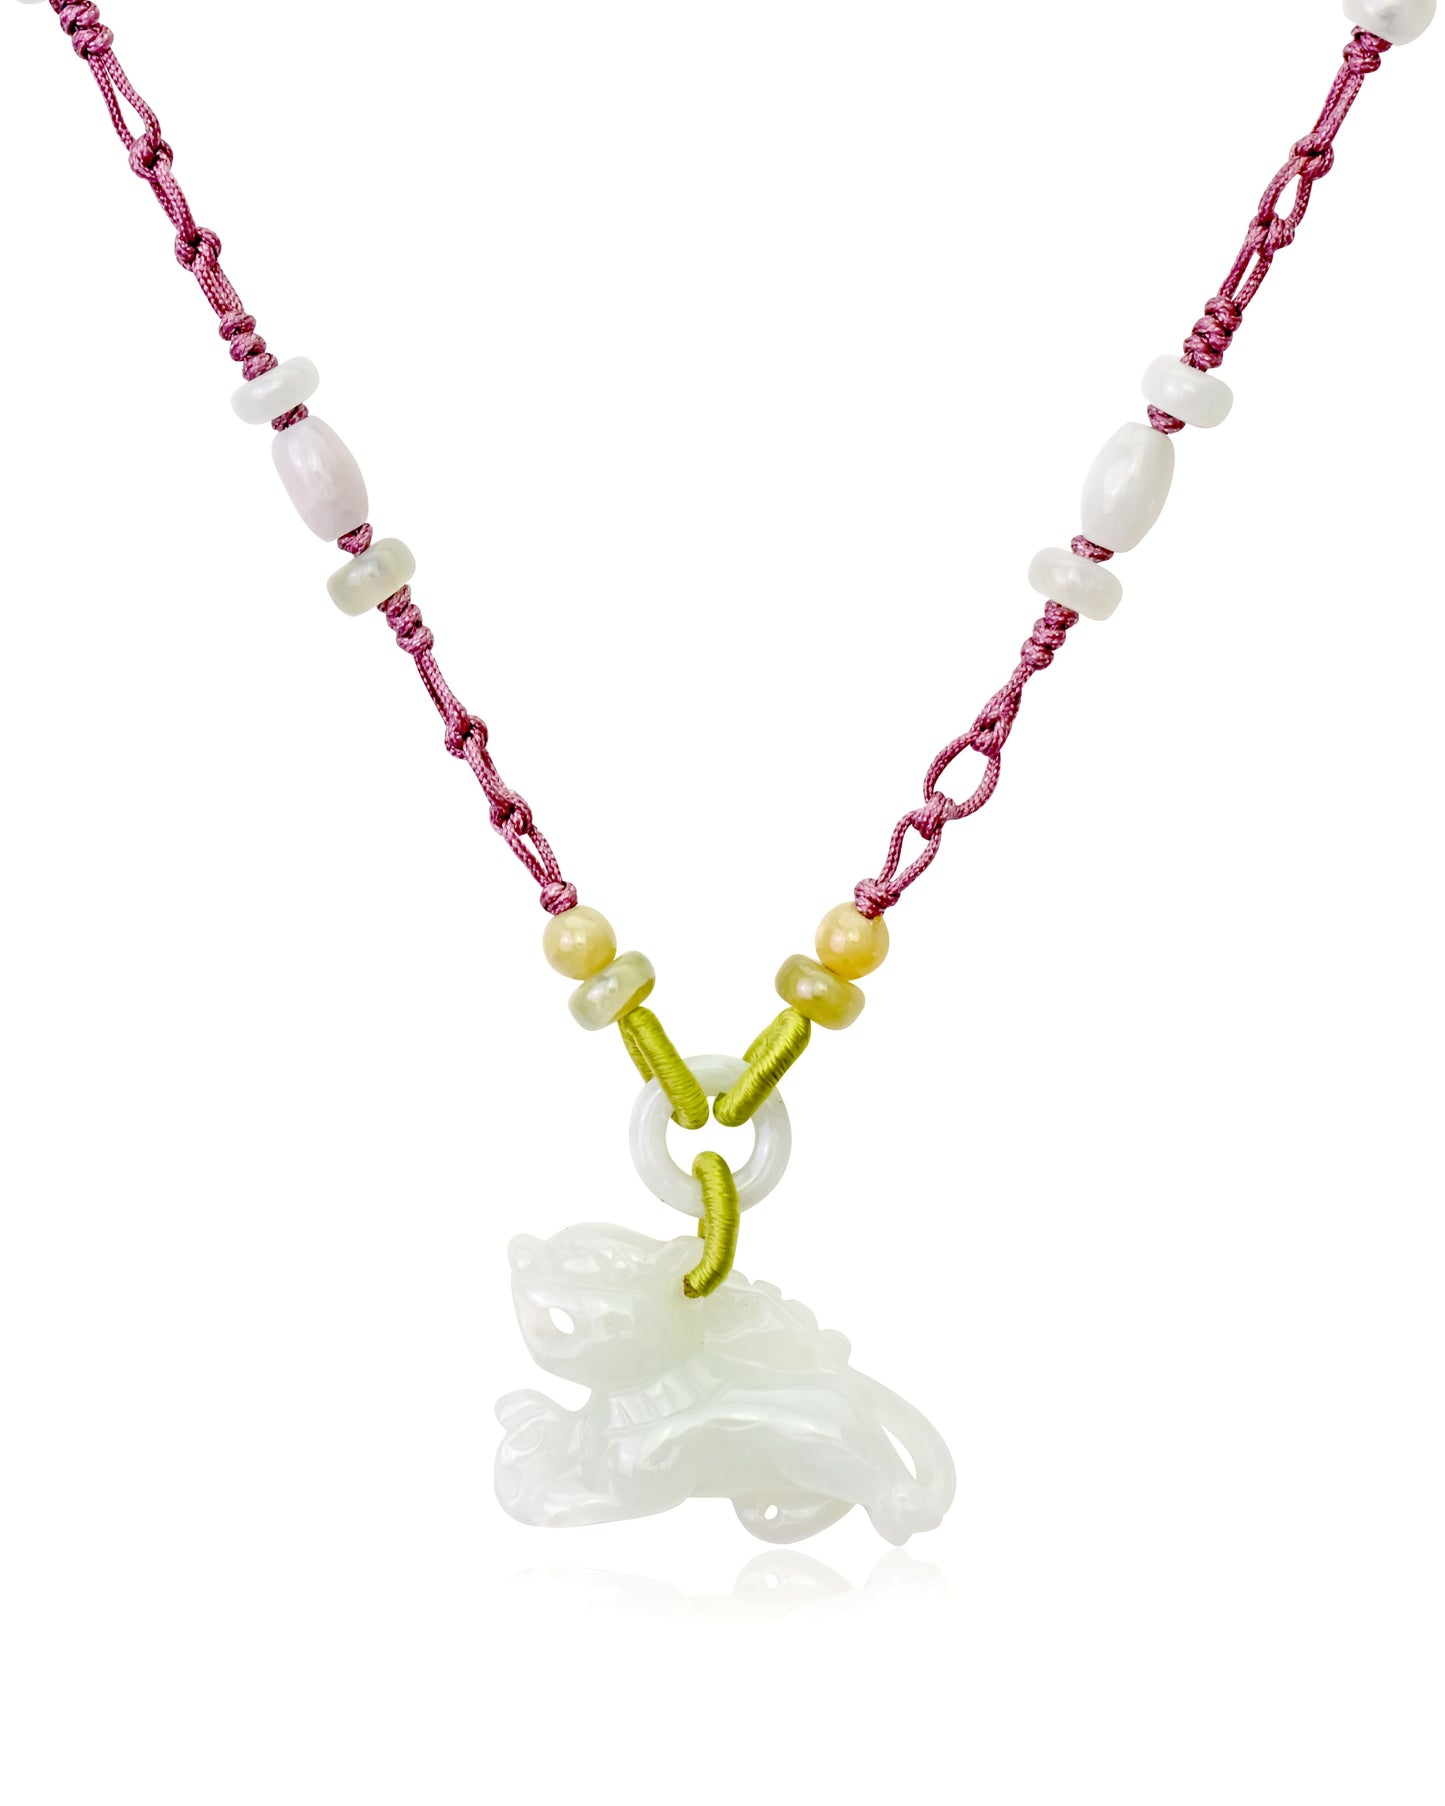 Unleash Your Inner Lion with a Handmade Jade Pendant made with Lavender Cord